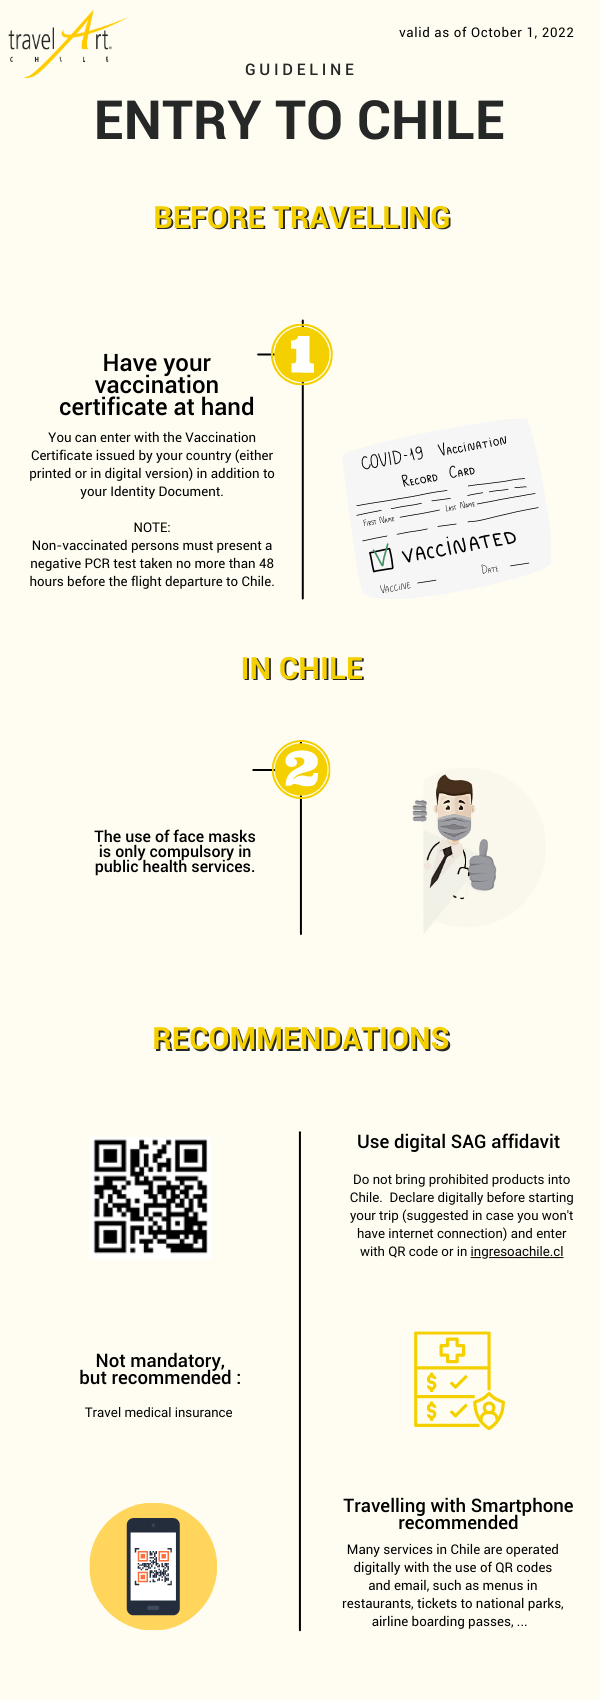 Guideline Entry to Chile